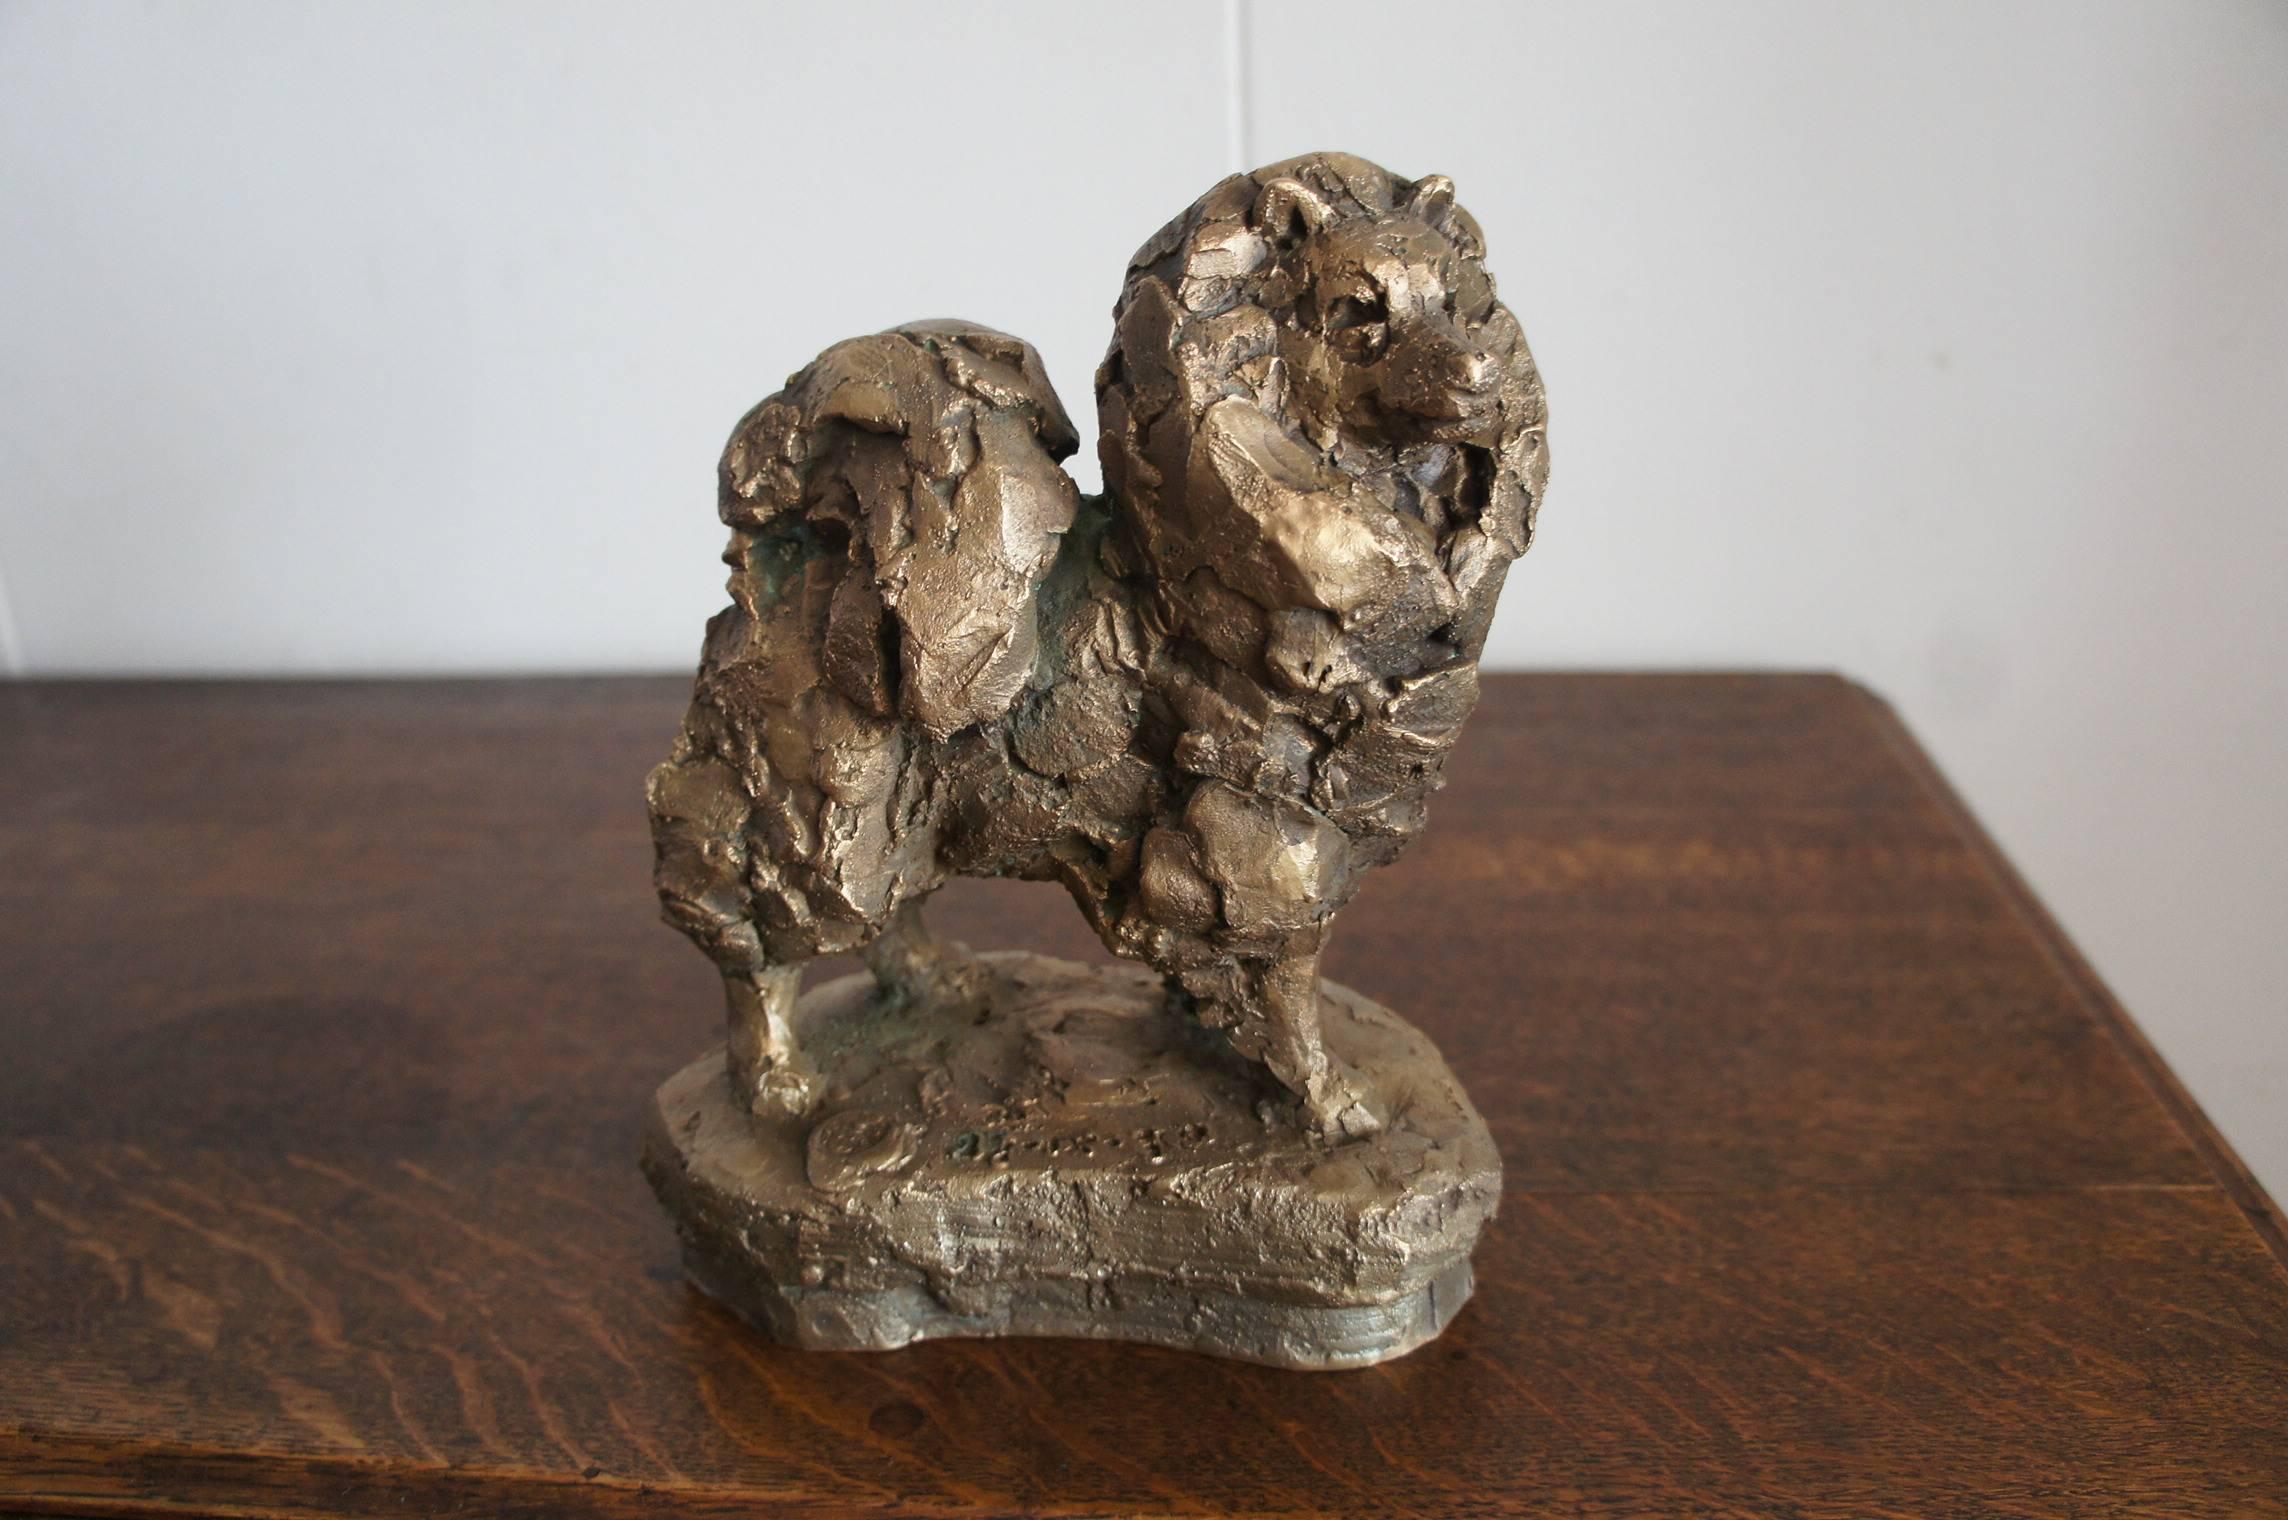 Bronze sculpture of a standing spitz dog.

Unfortunately we do not know whom this sculpture was made by nor from which country it originates. This rare example comes with a founders mark and it appears to have a date on it also (27-9-78). This could